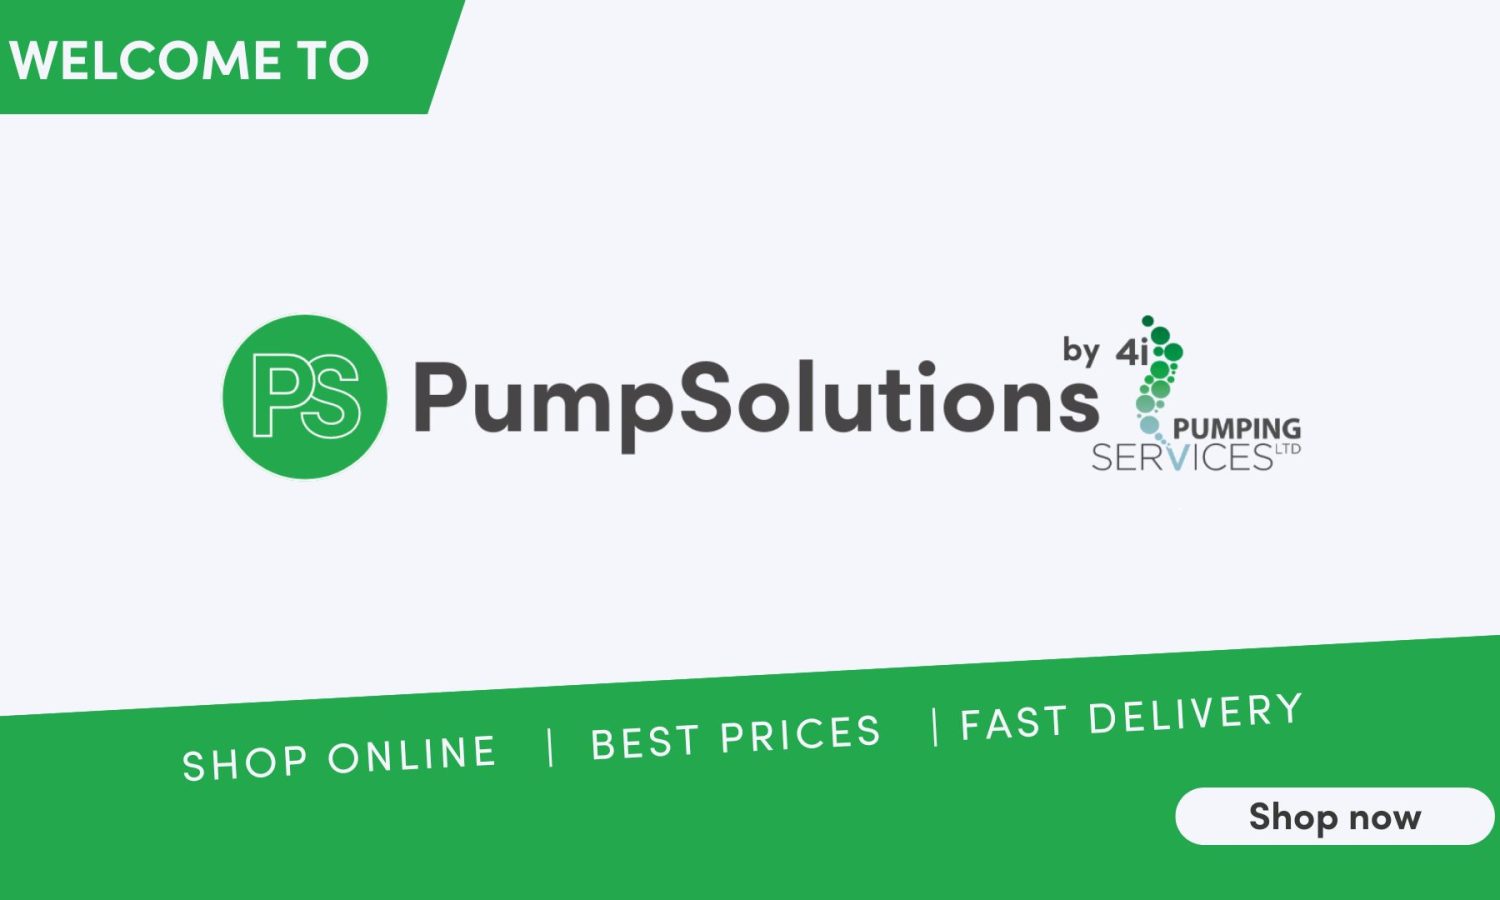 Pump Solutions by 4i Pumping Services